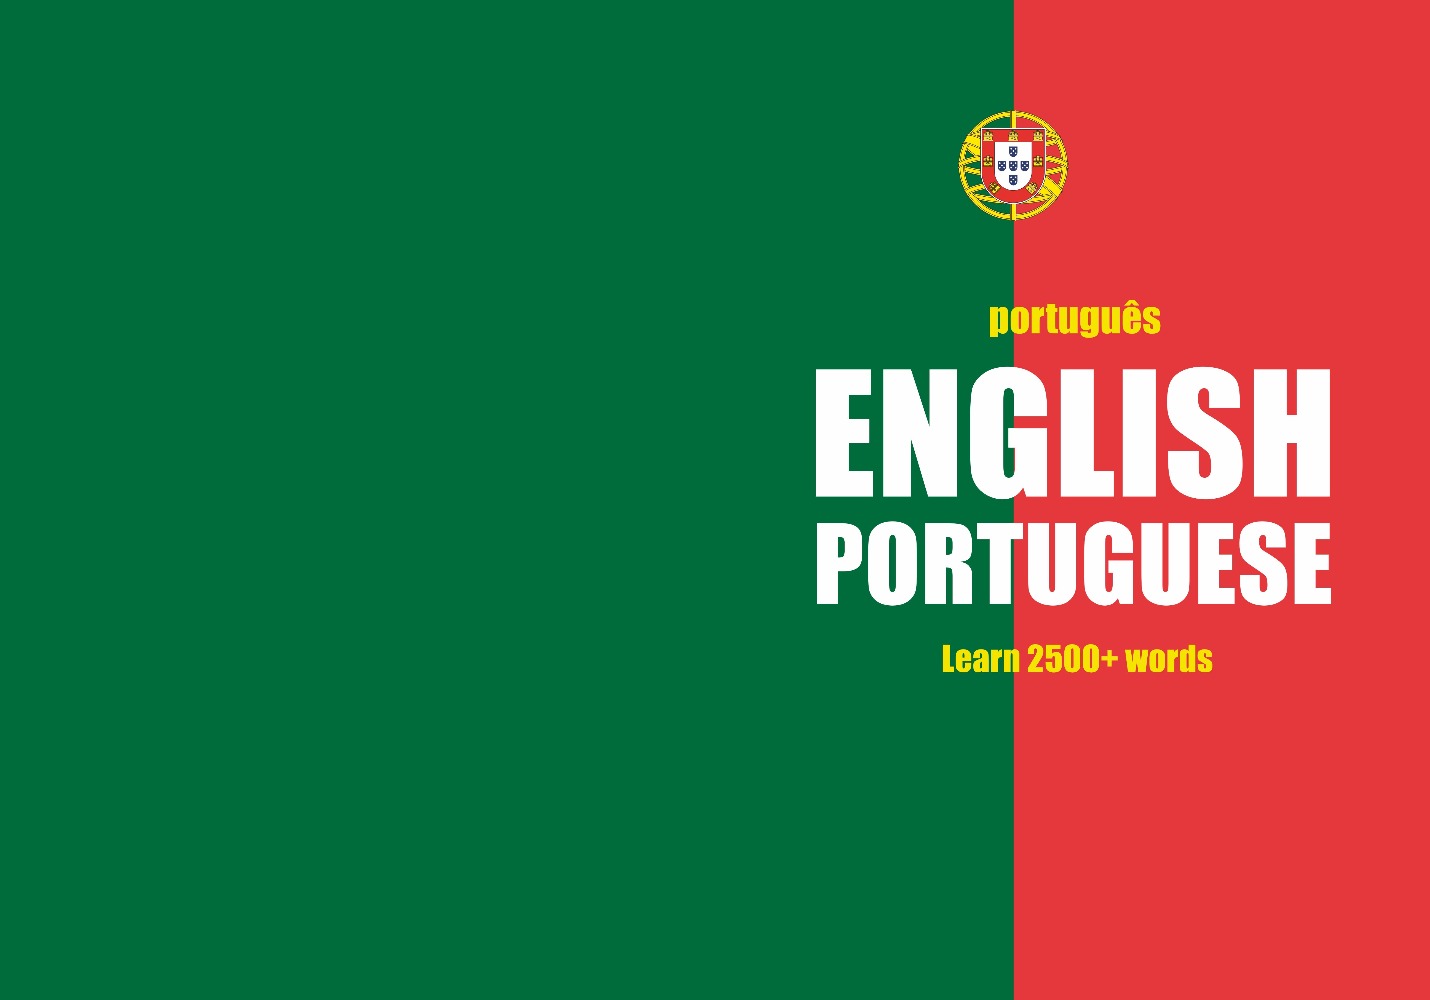 Portuguese language learning notebook cover